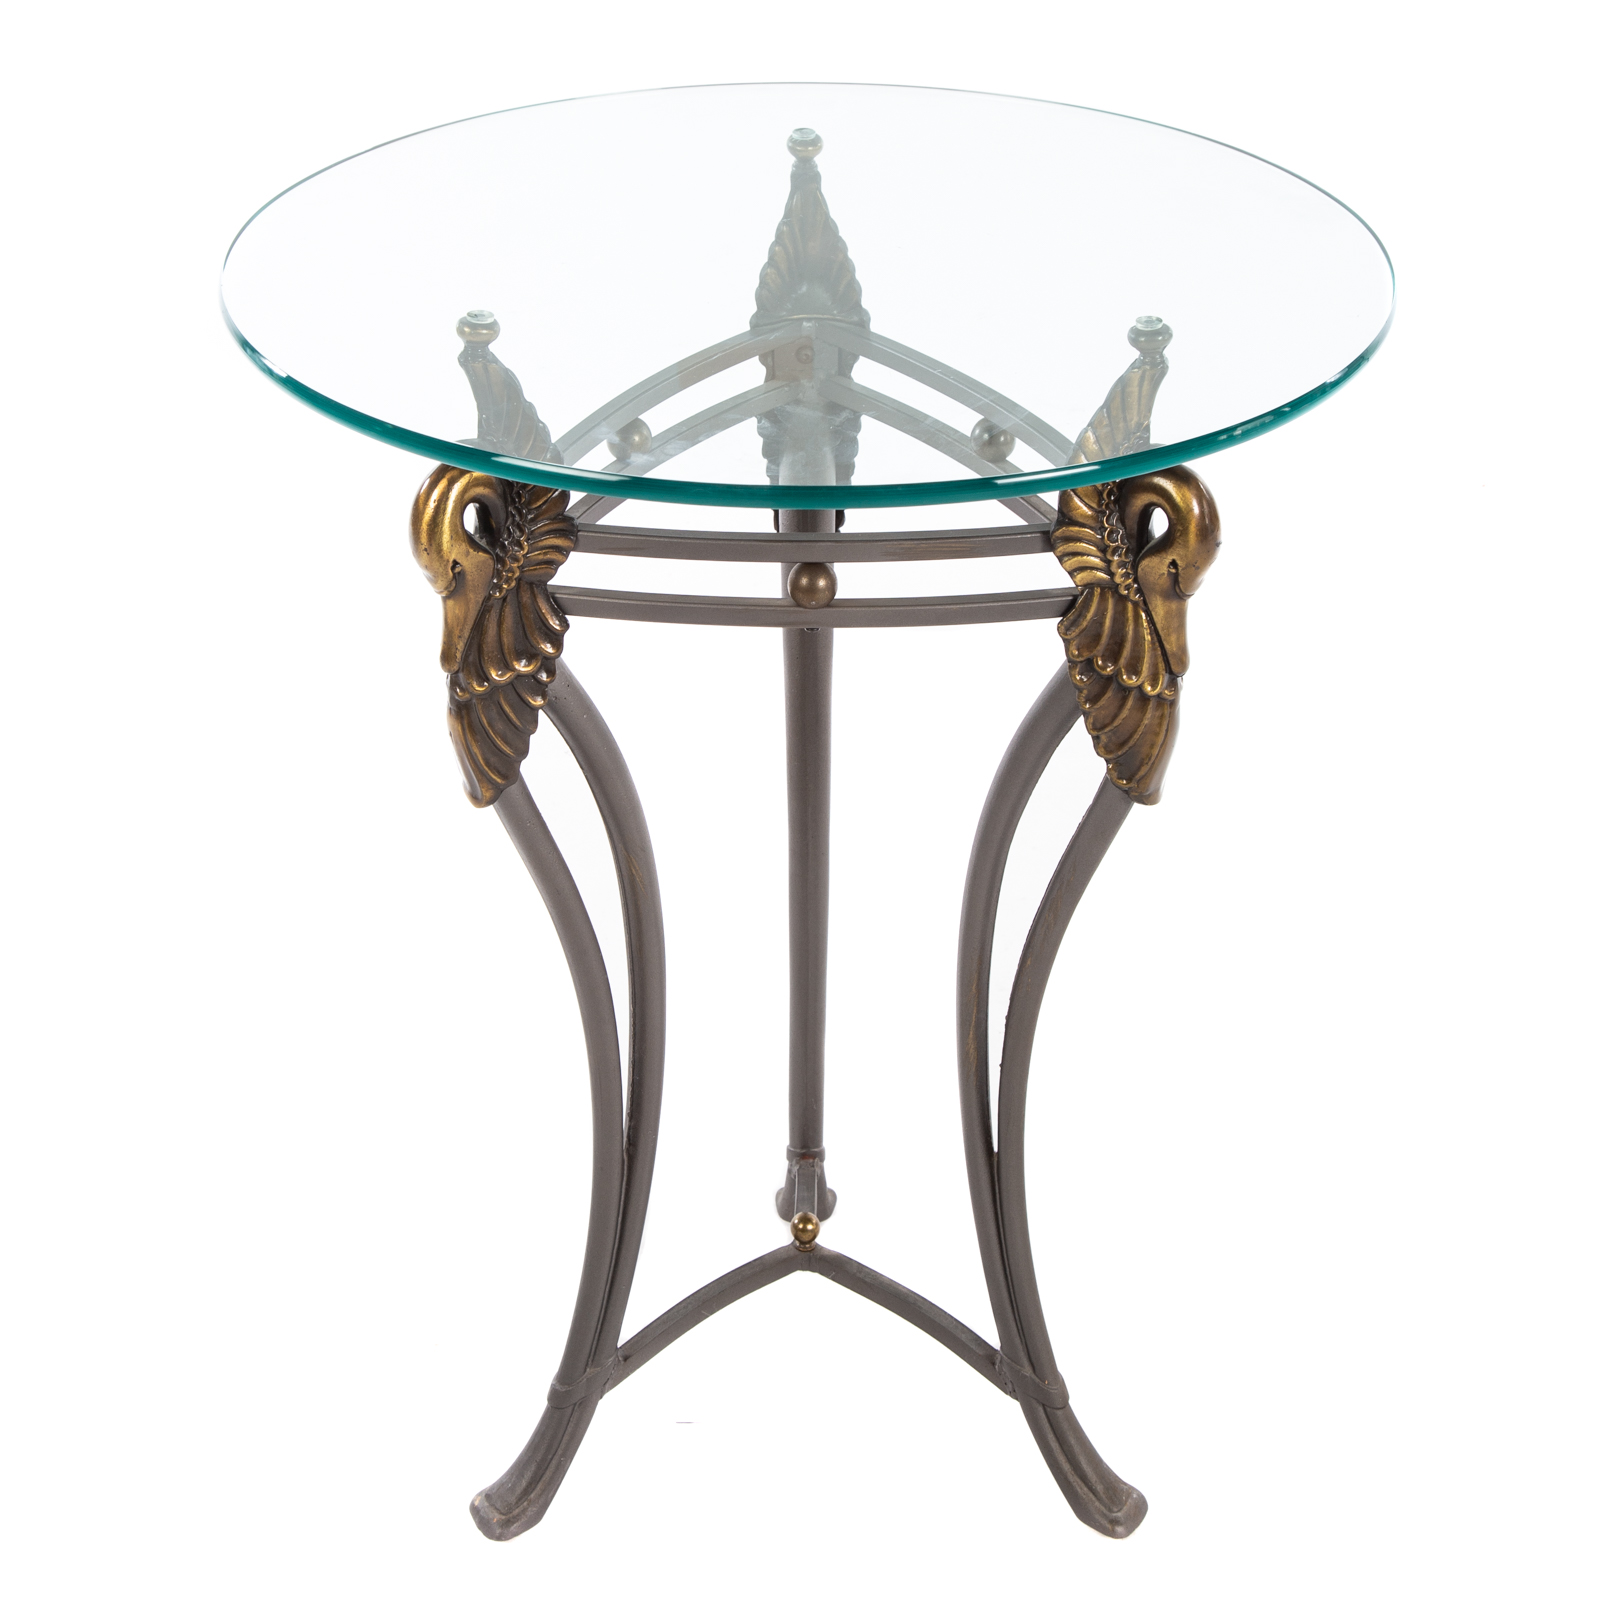 CONTEMPORARY GLASS & BRASS LAMP TABLE